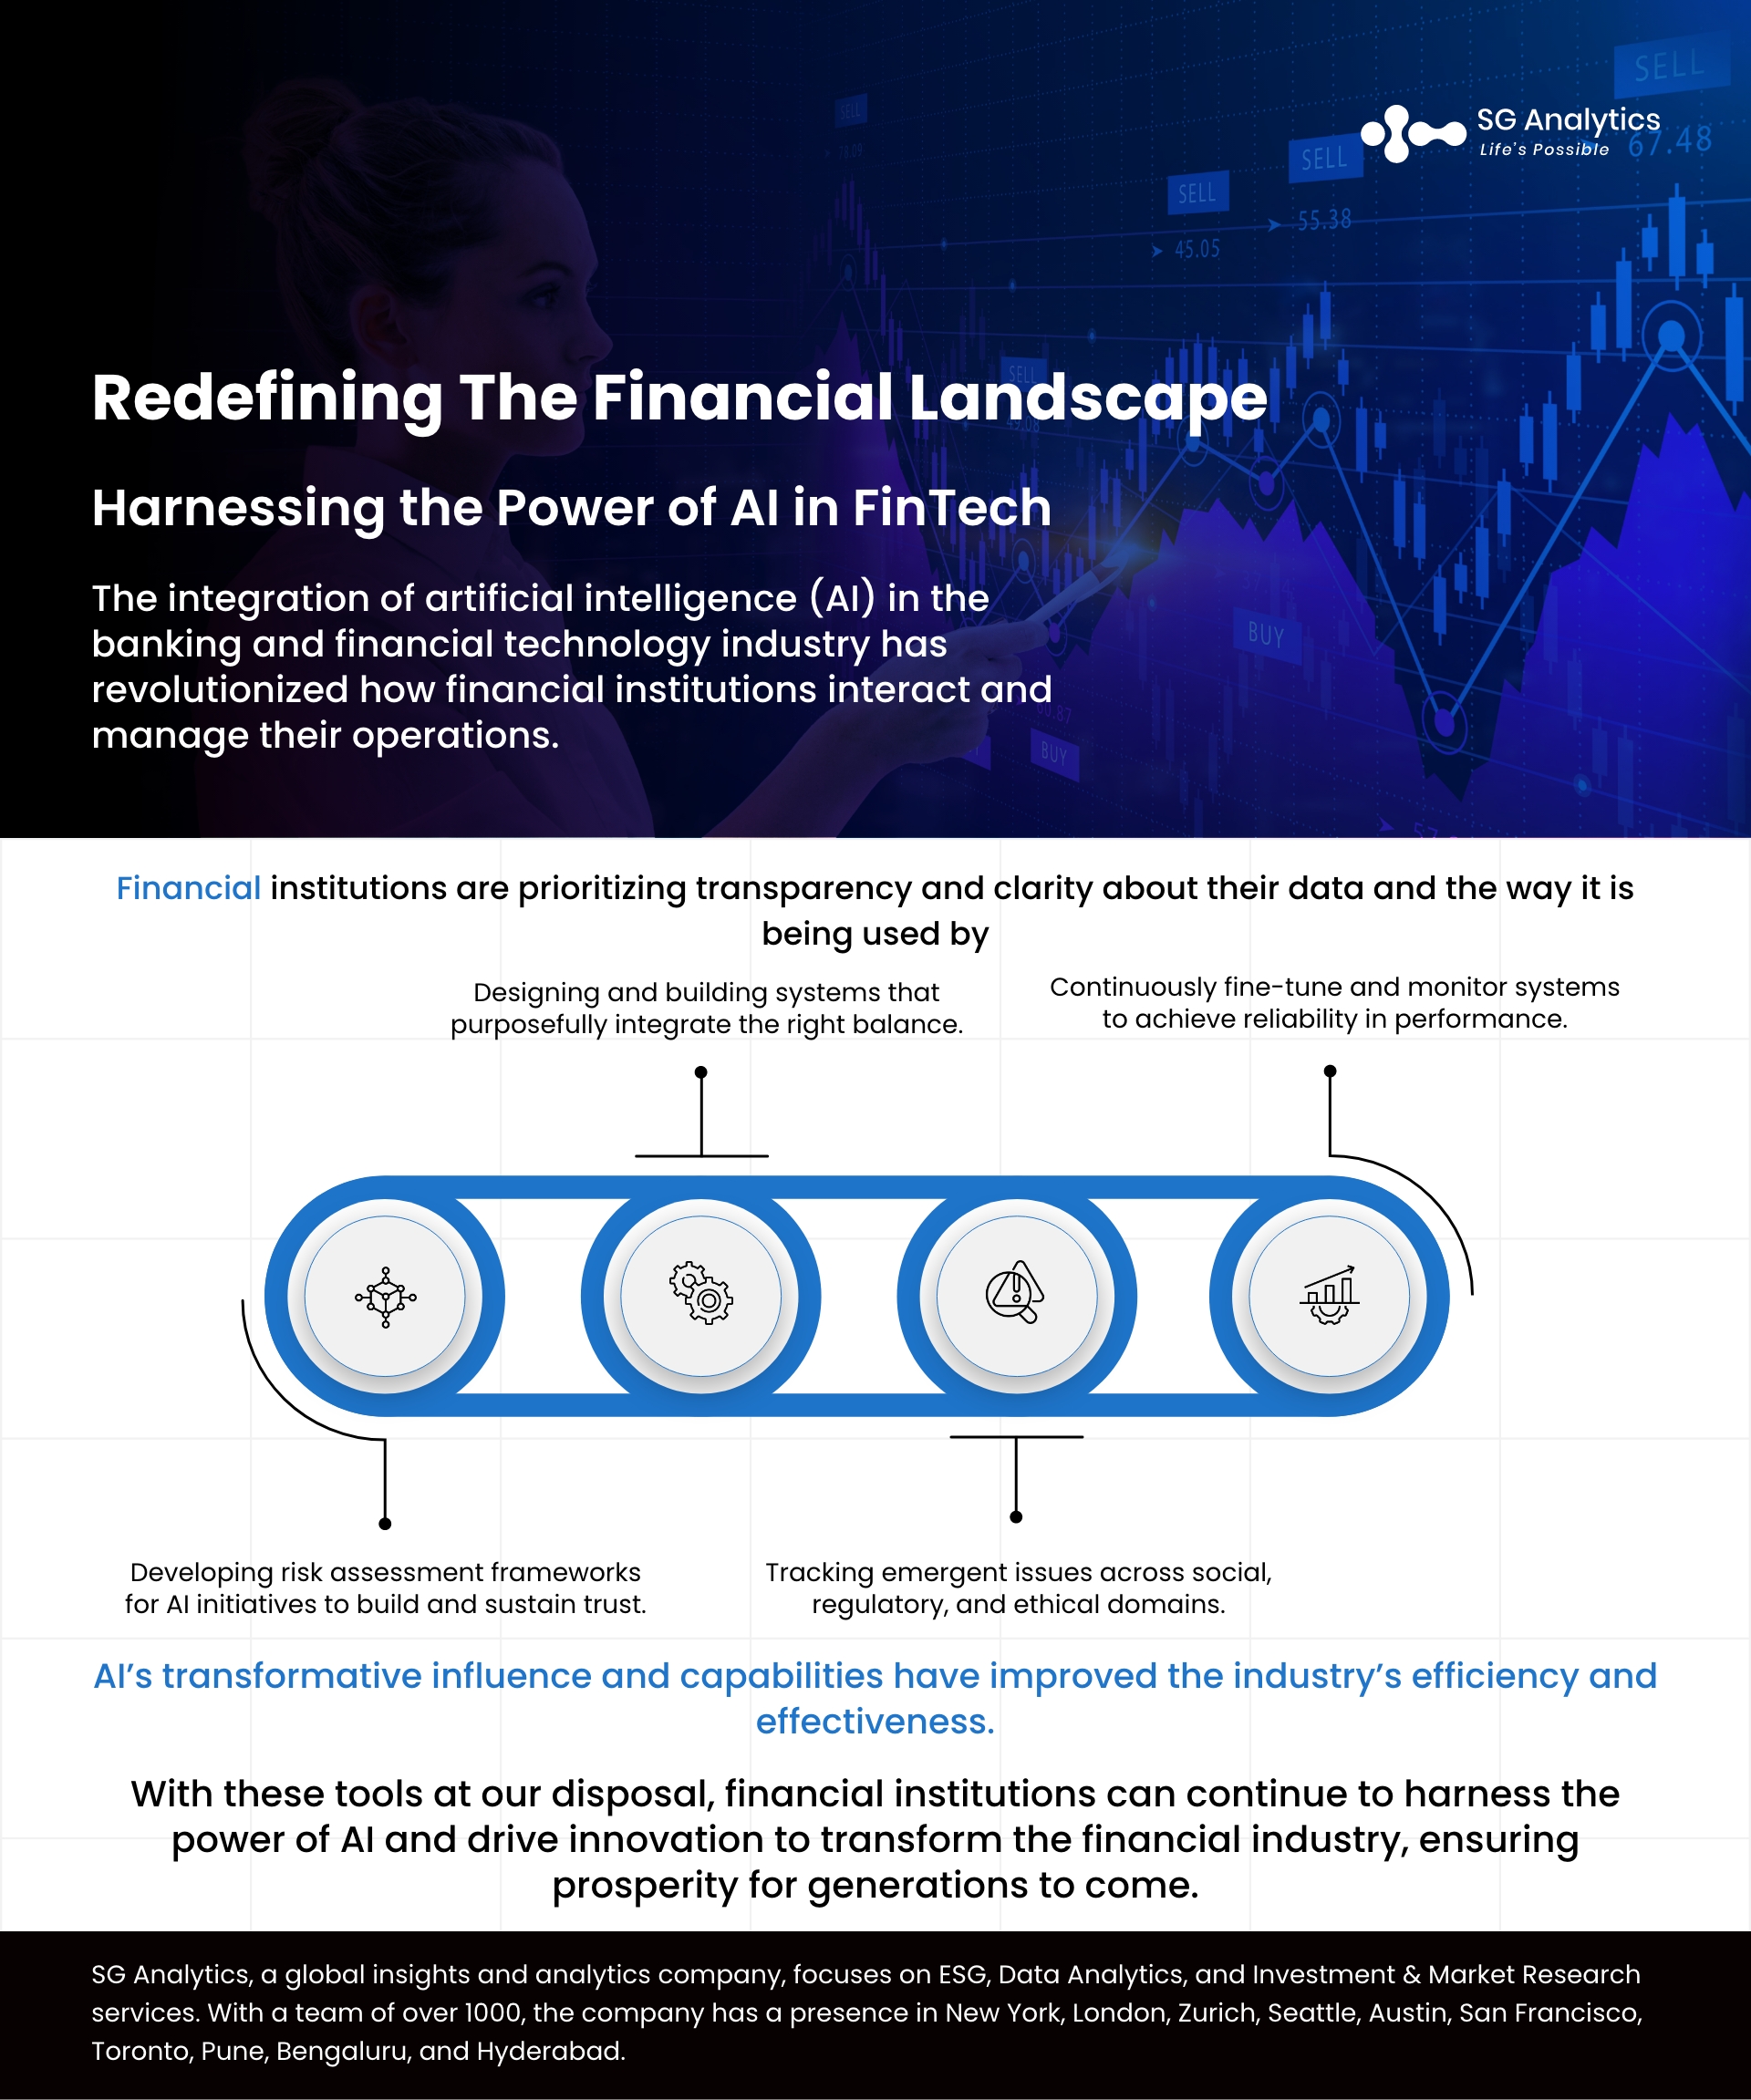 Harnessing the Power of AI in FinTech